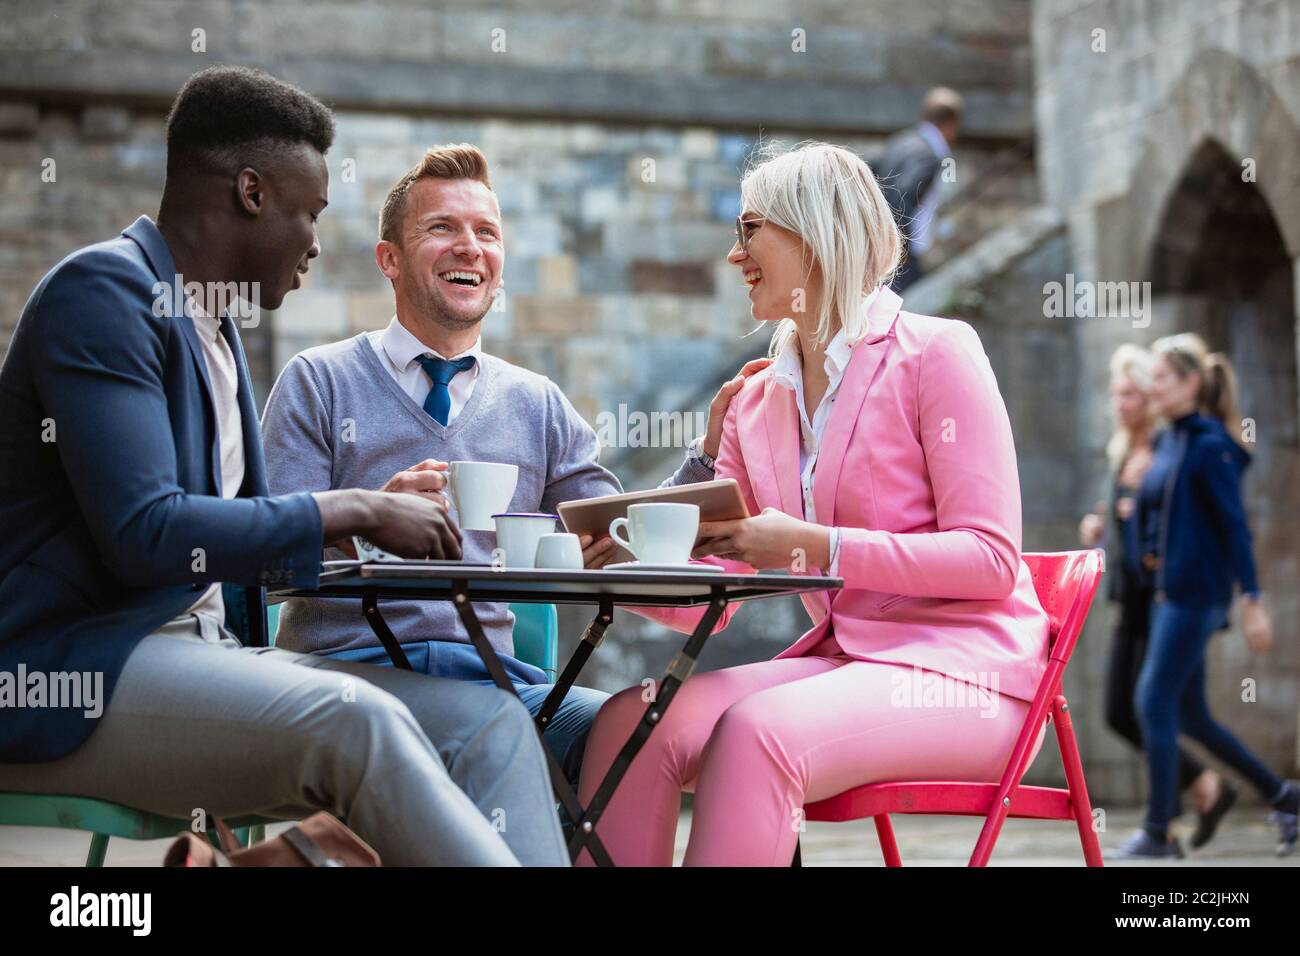 Two businessmen and a businesswoman sitting at an outdoor table in a city having a hot drink while laughing at something on a digital tablet. One man Stock Photo